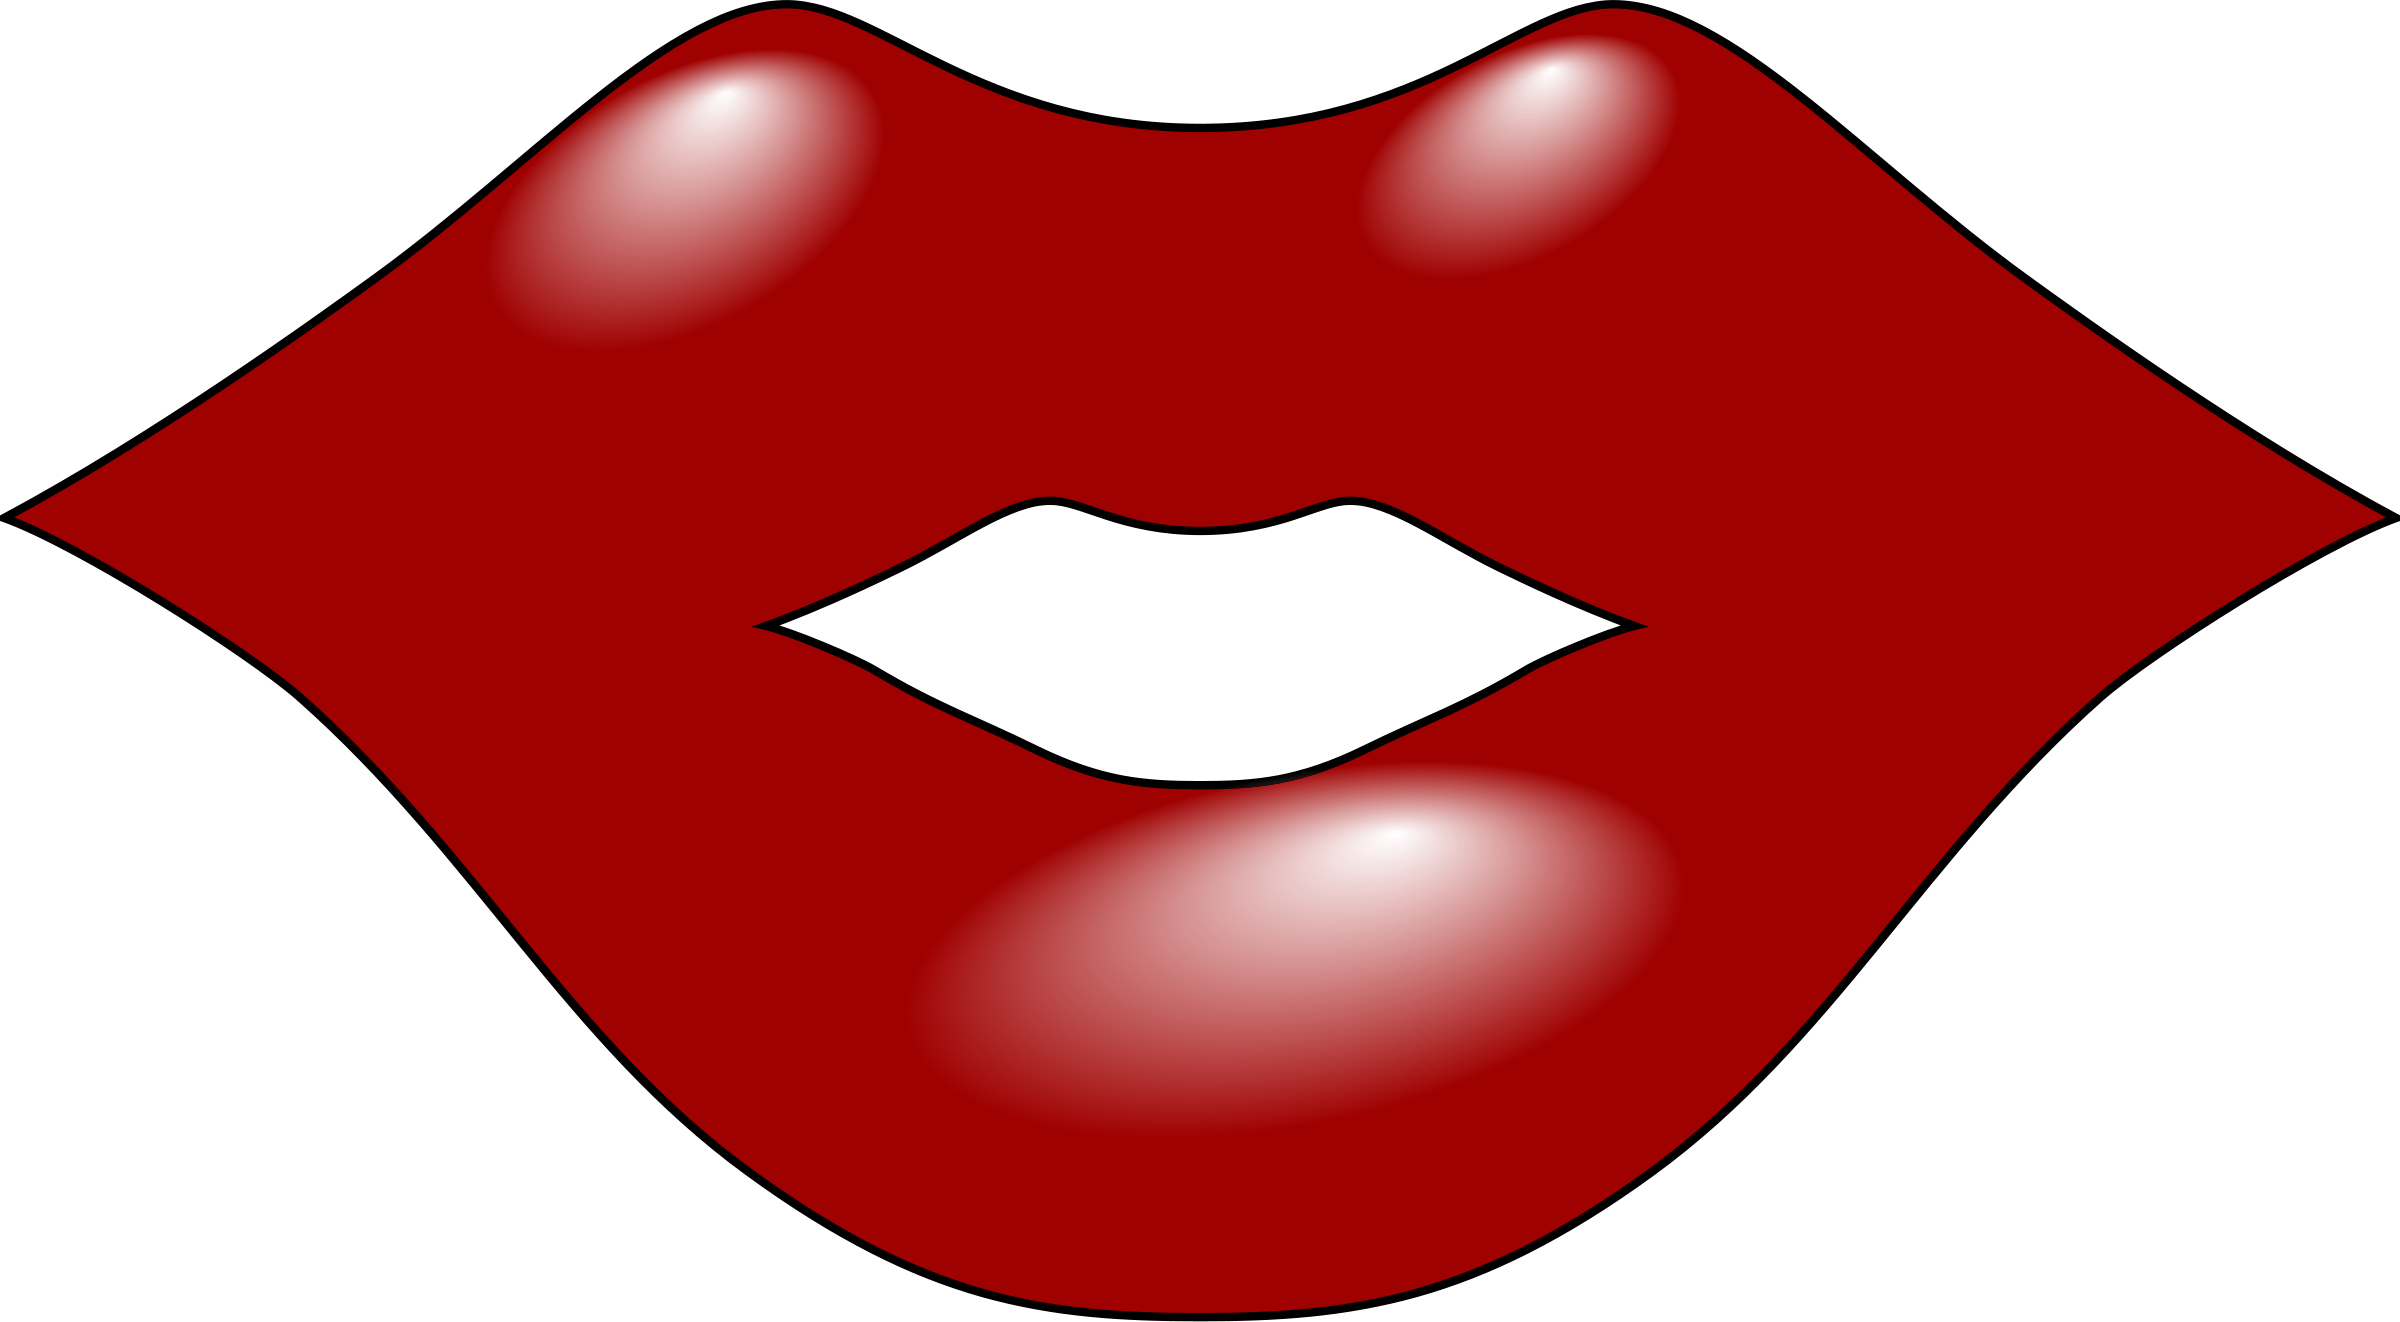 Red Lips and Tongue Logo - Free Red Lips Clipart, Download Free Clip Art, Free Clip Art